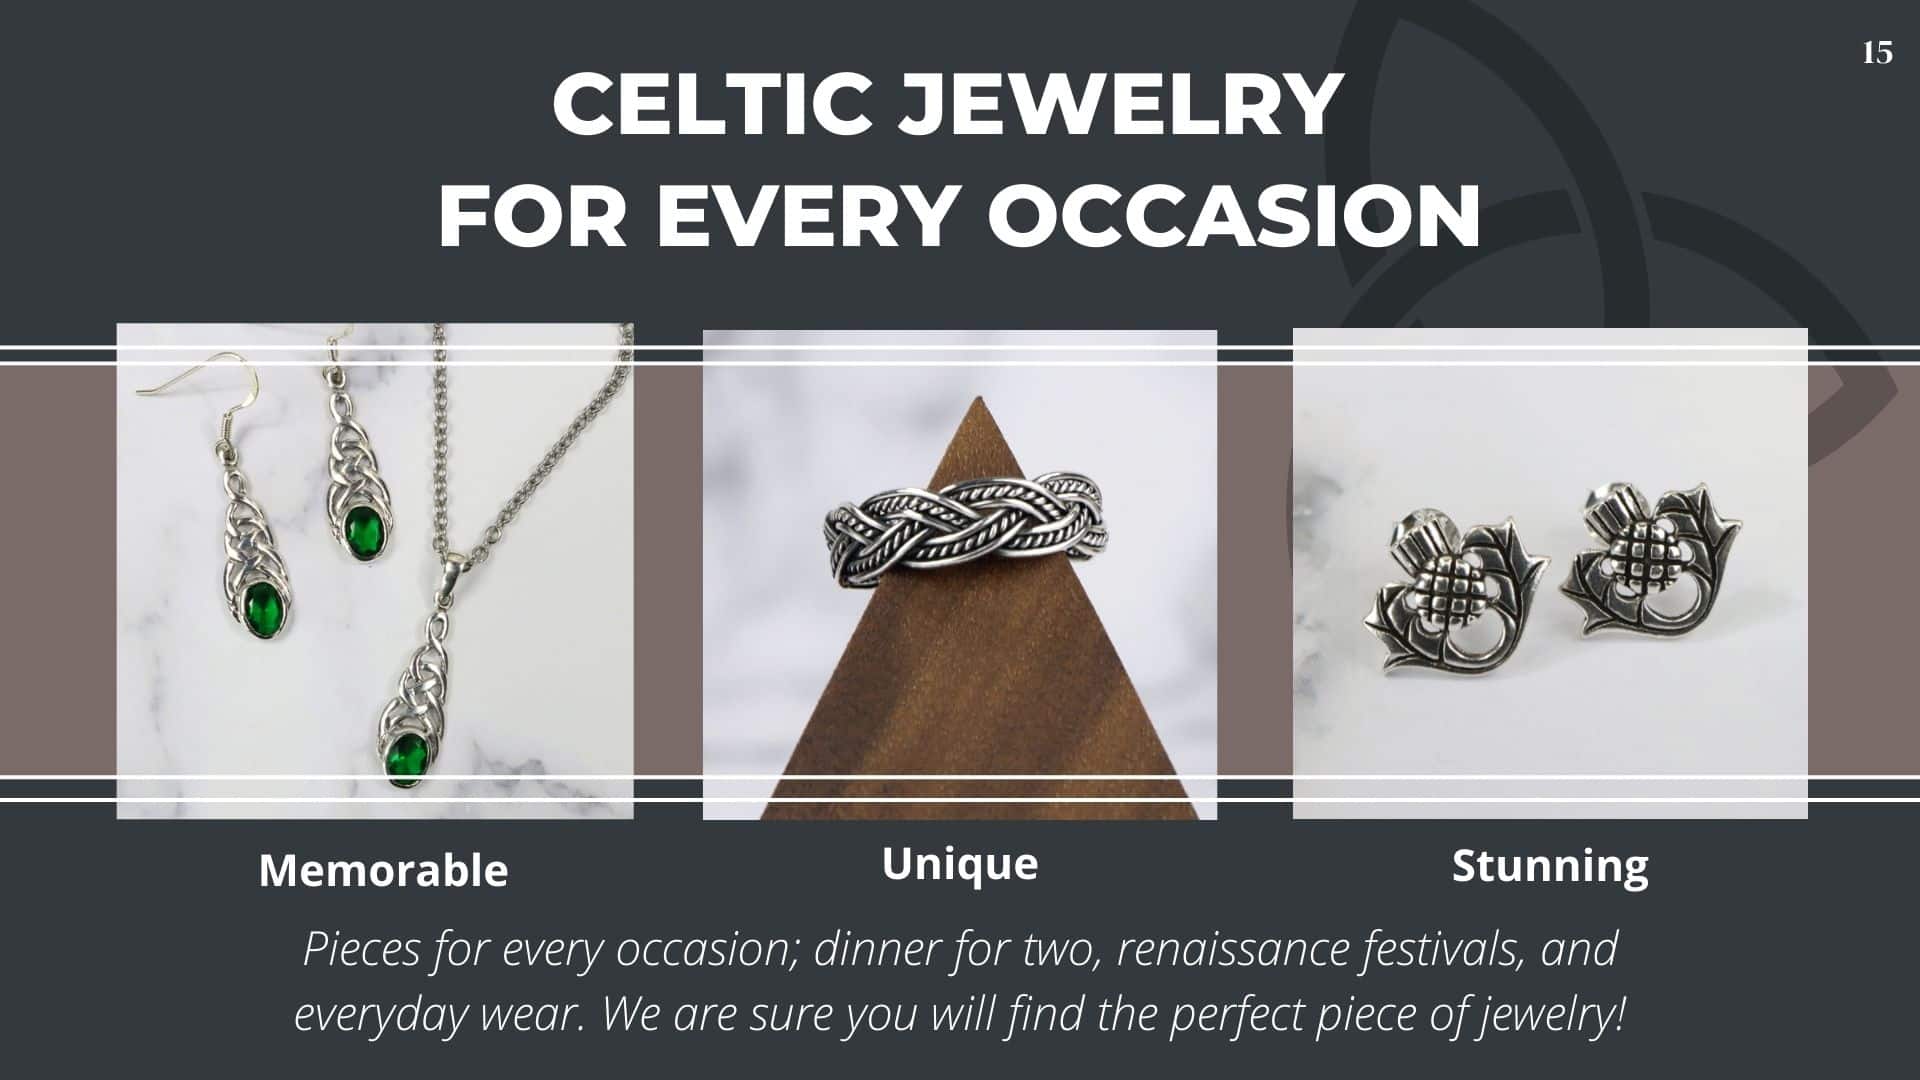 Celtic jewelry for every occasion.